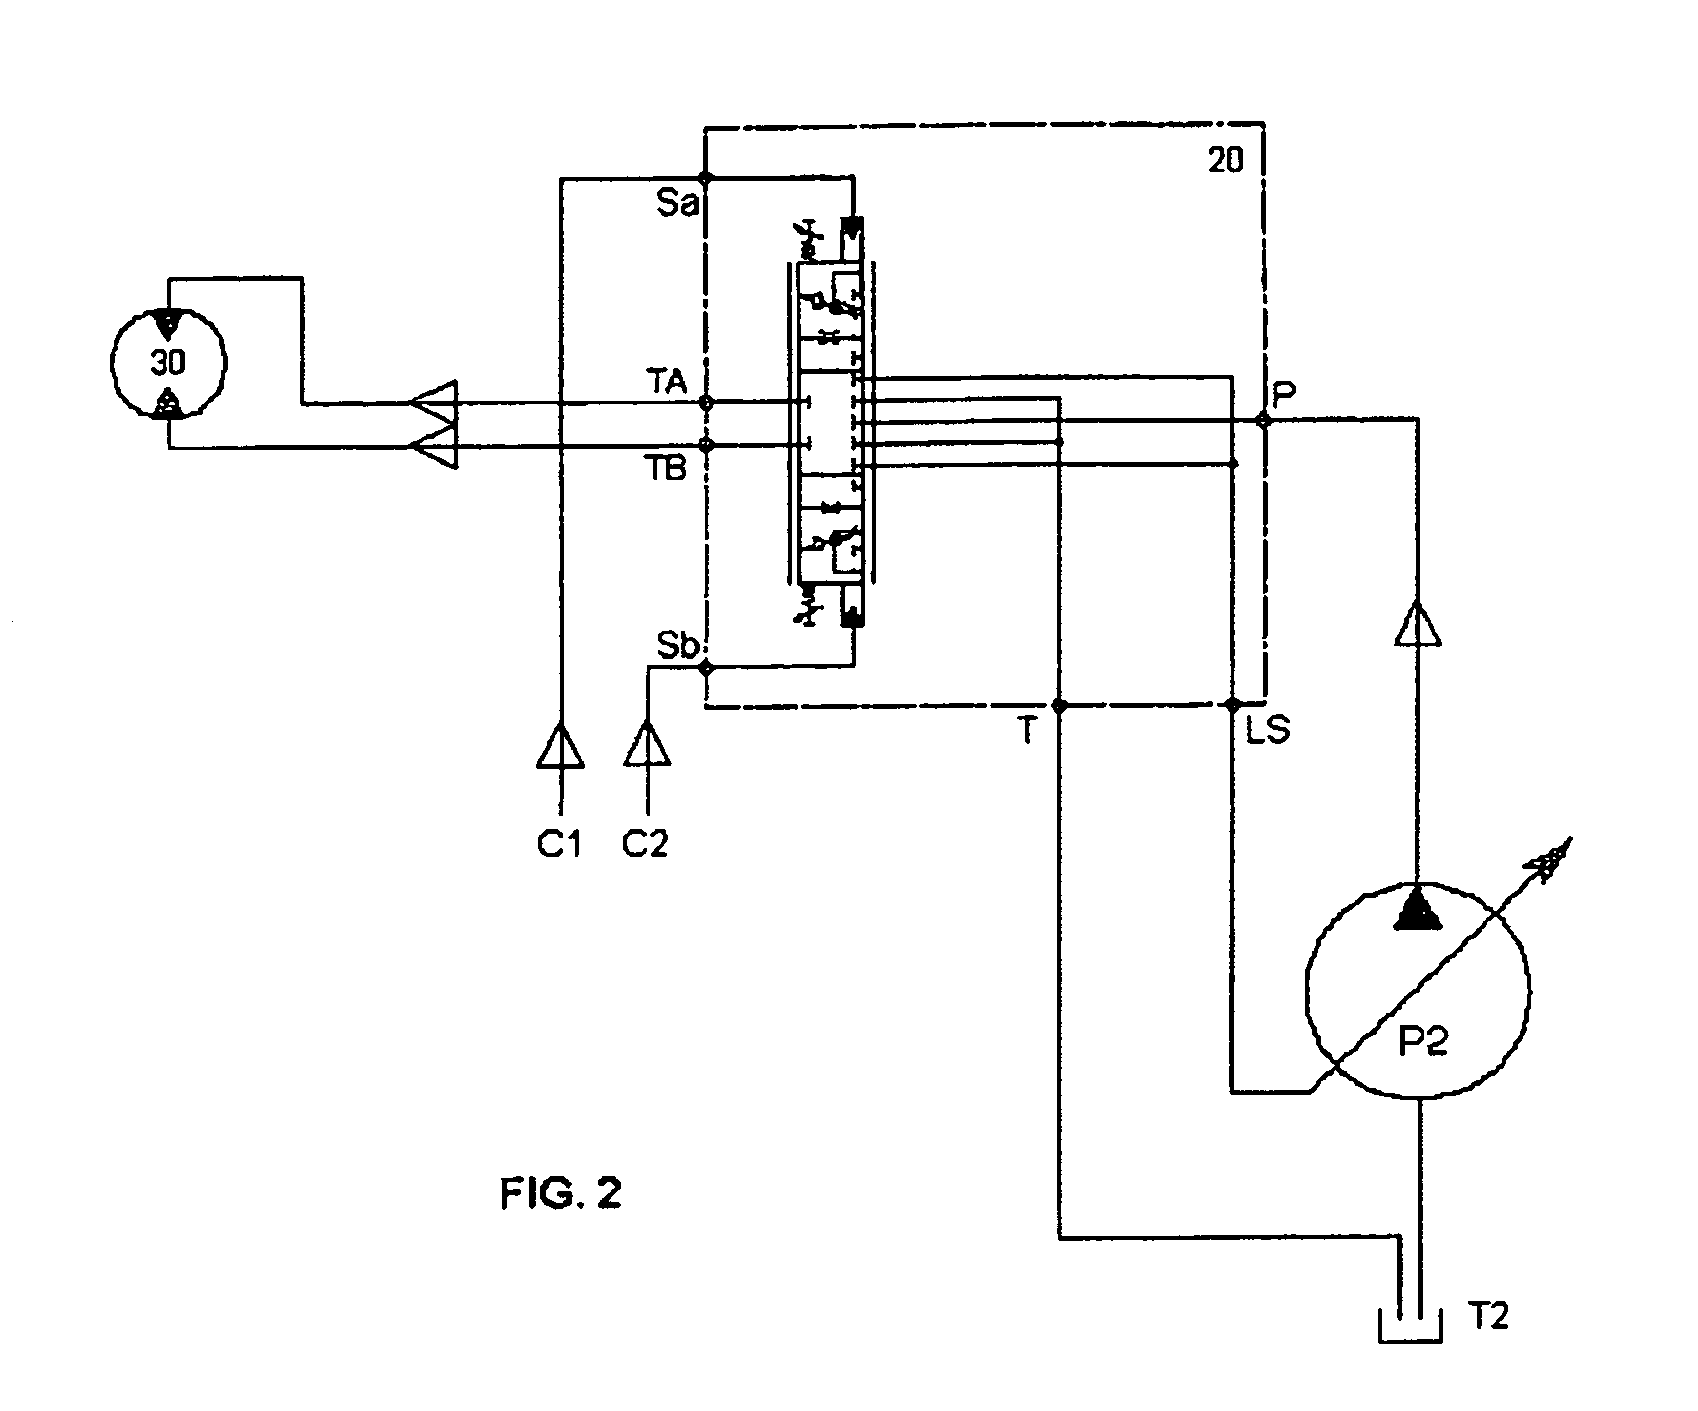 Hydraulic circuit for operating a tool